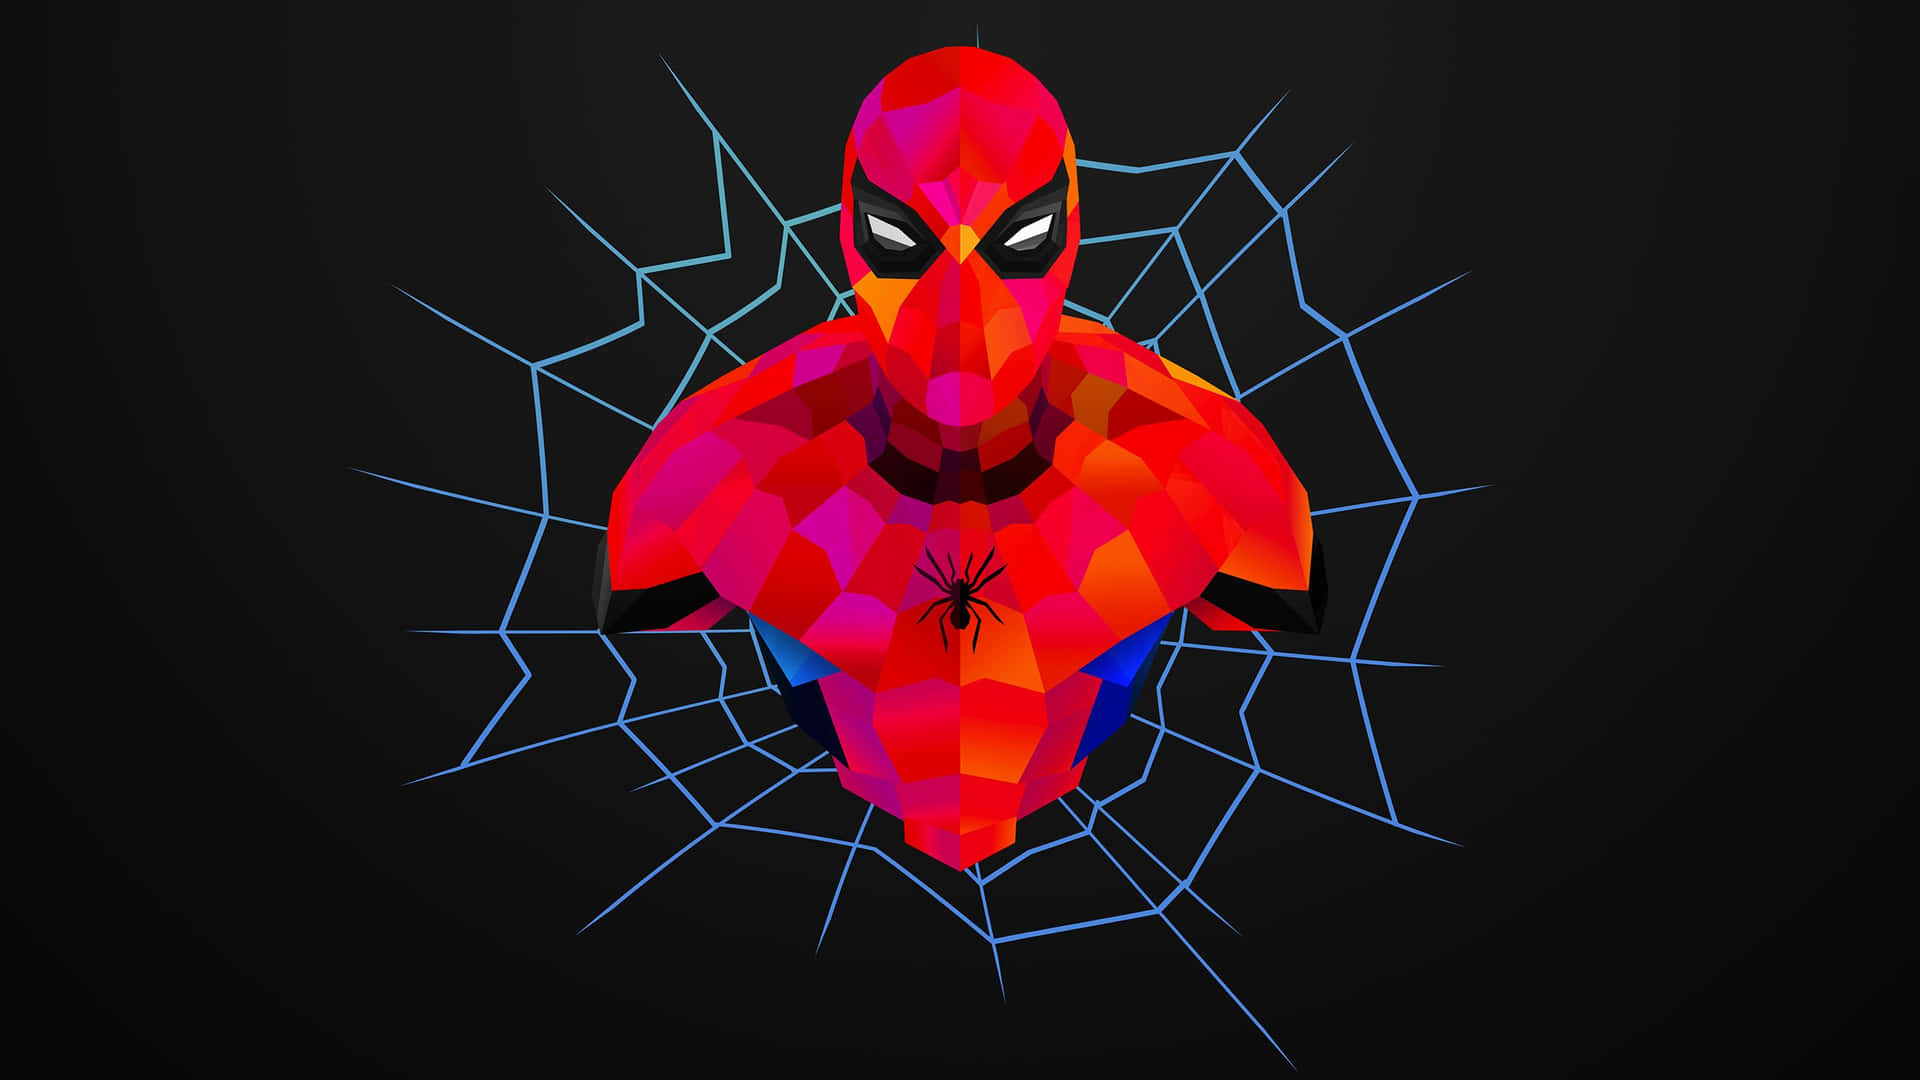 Marvel's Best Spider-Man in All His Glory" Wallpaper